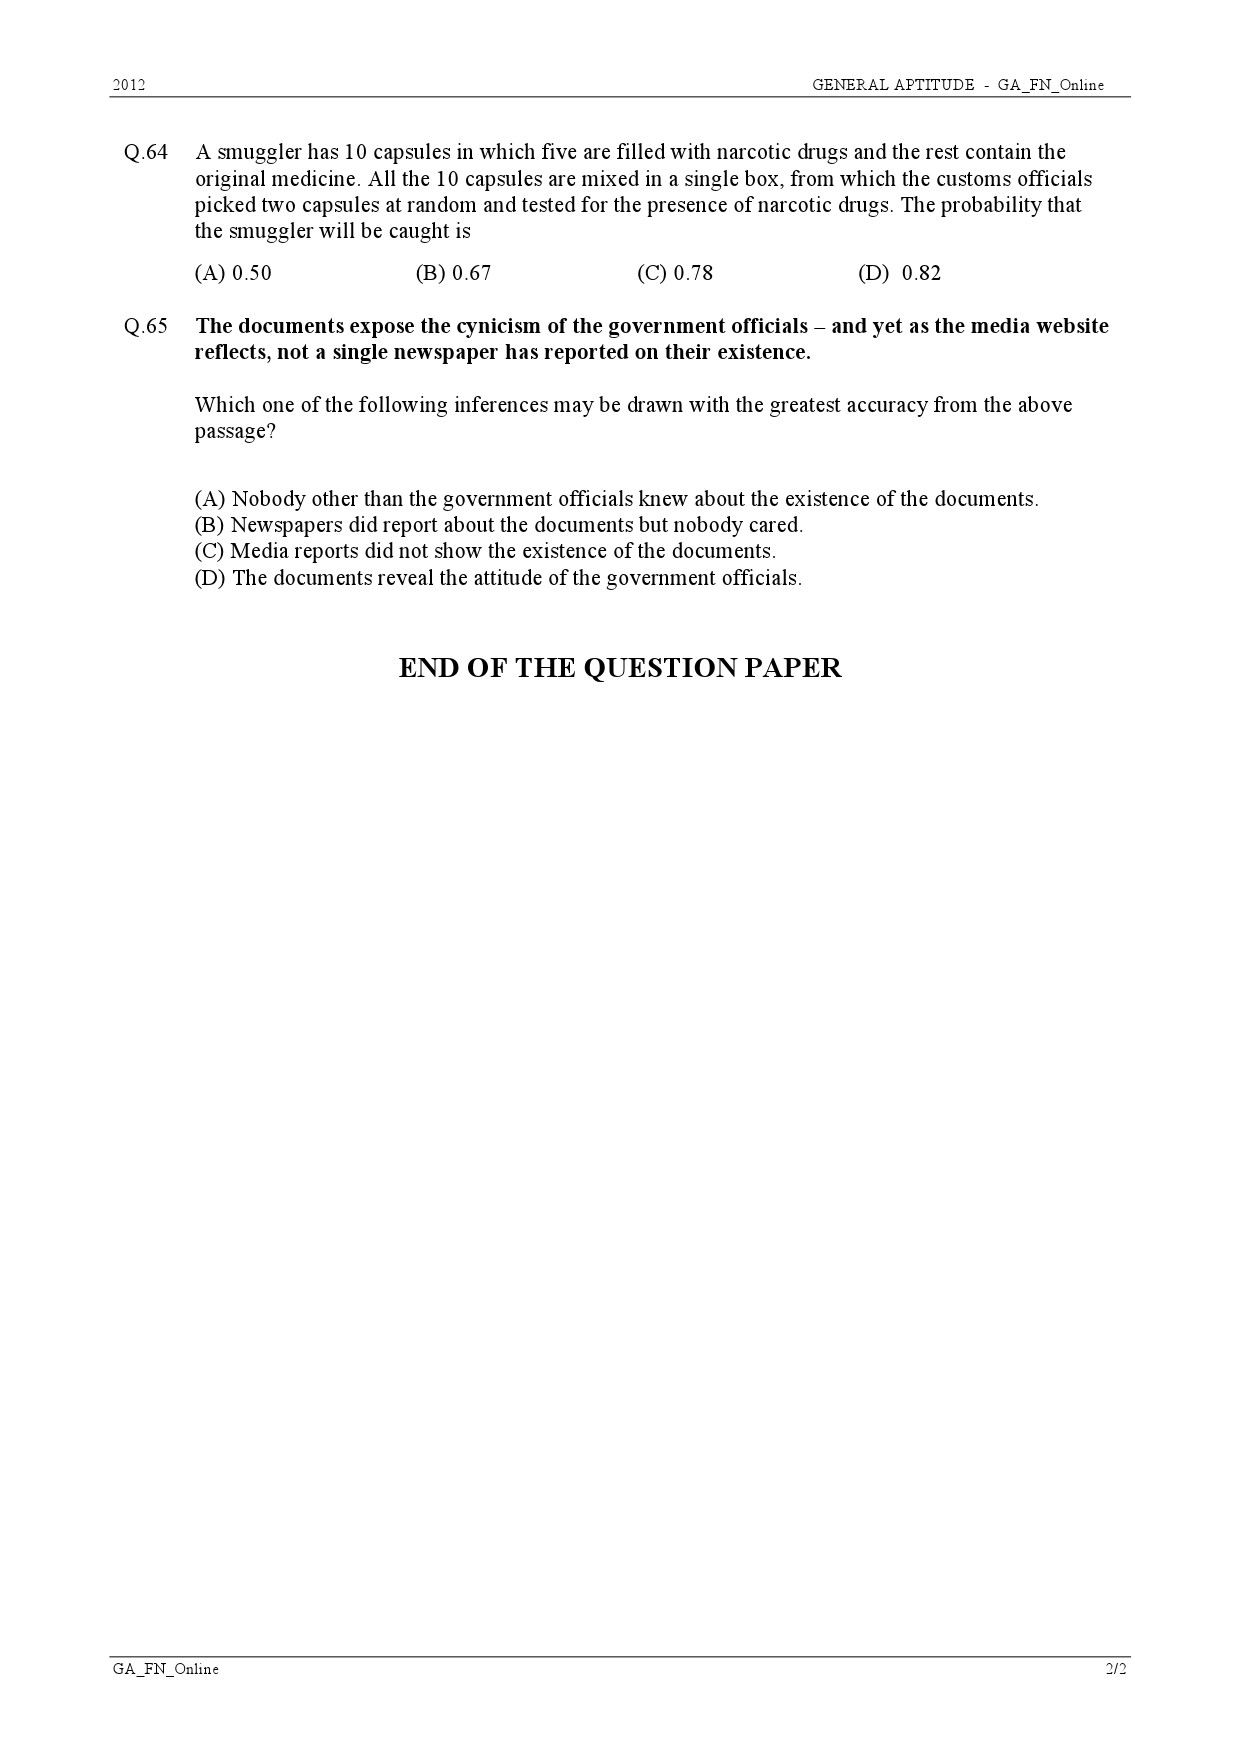 GATE Exam Question Paper 2012 Textile Engineering and Fibre Science 11